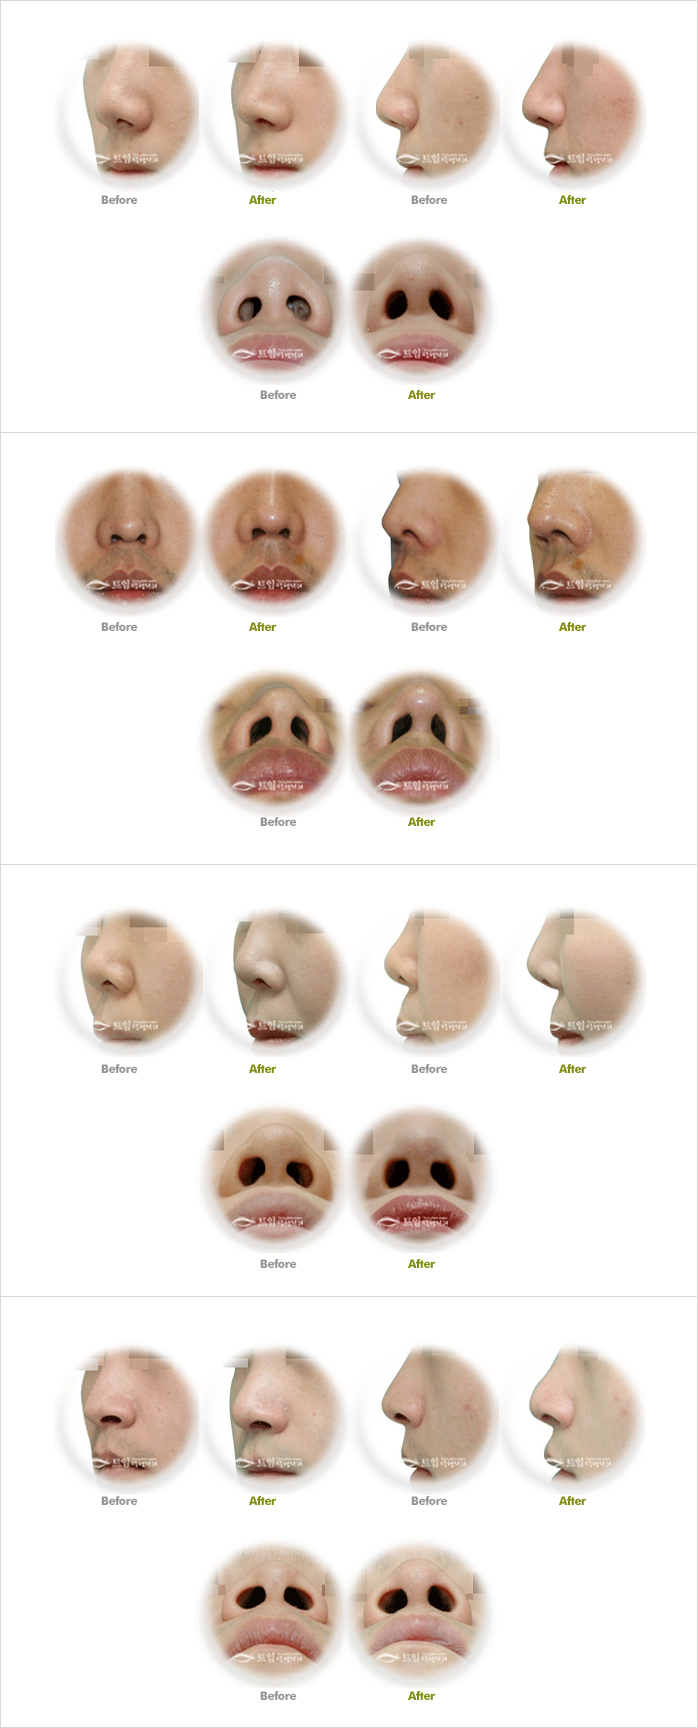 all different nose shapes